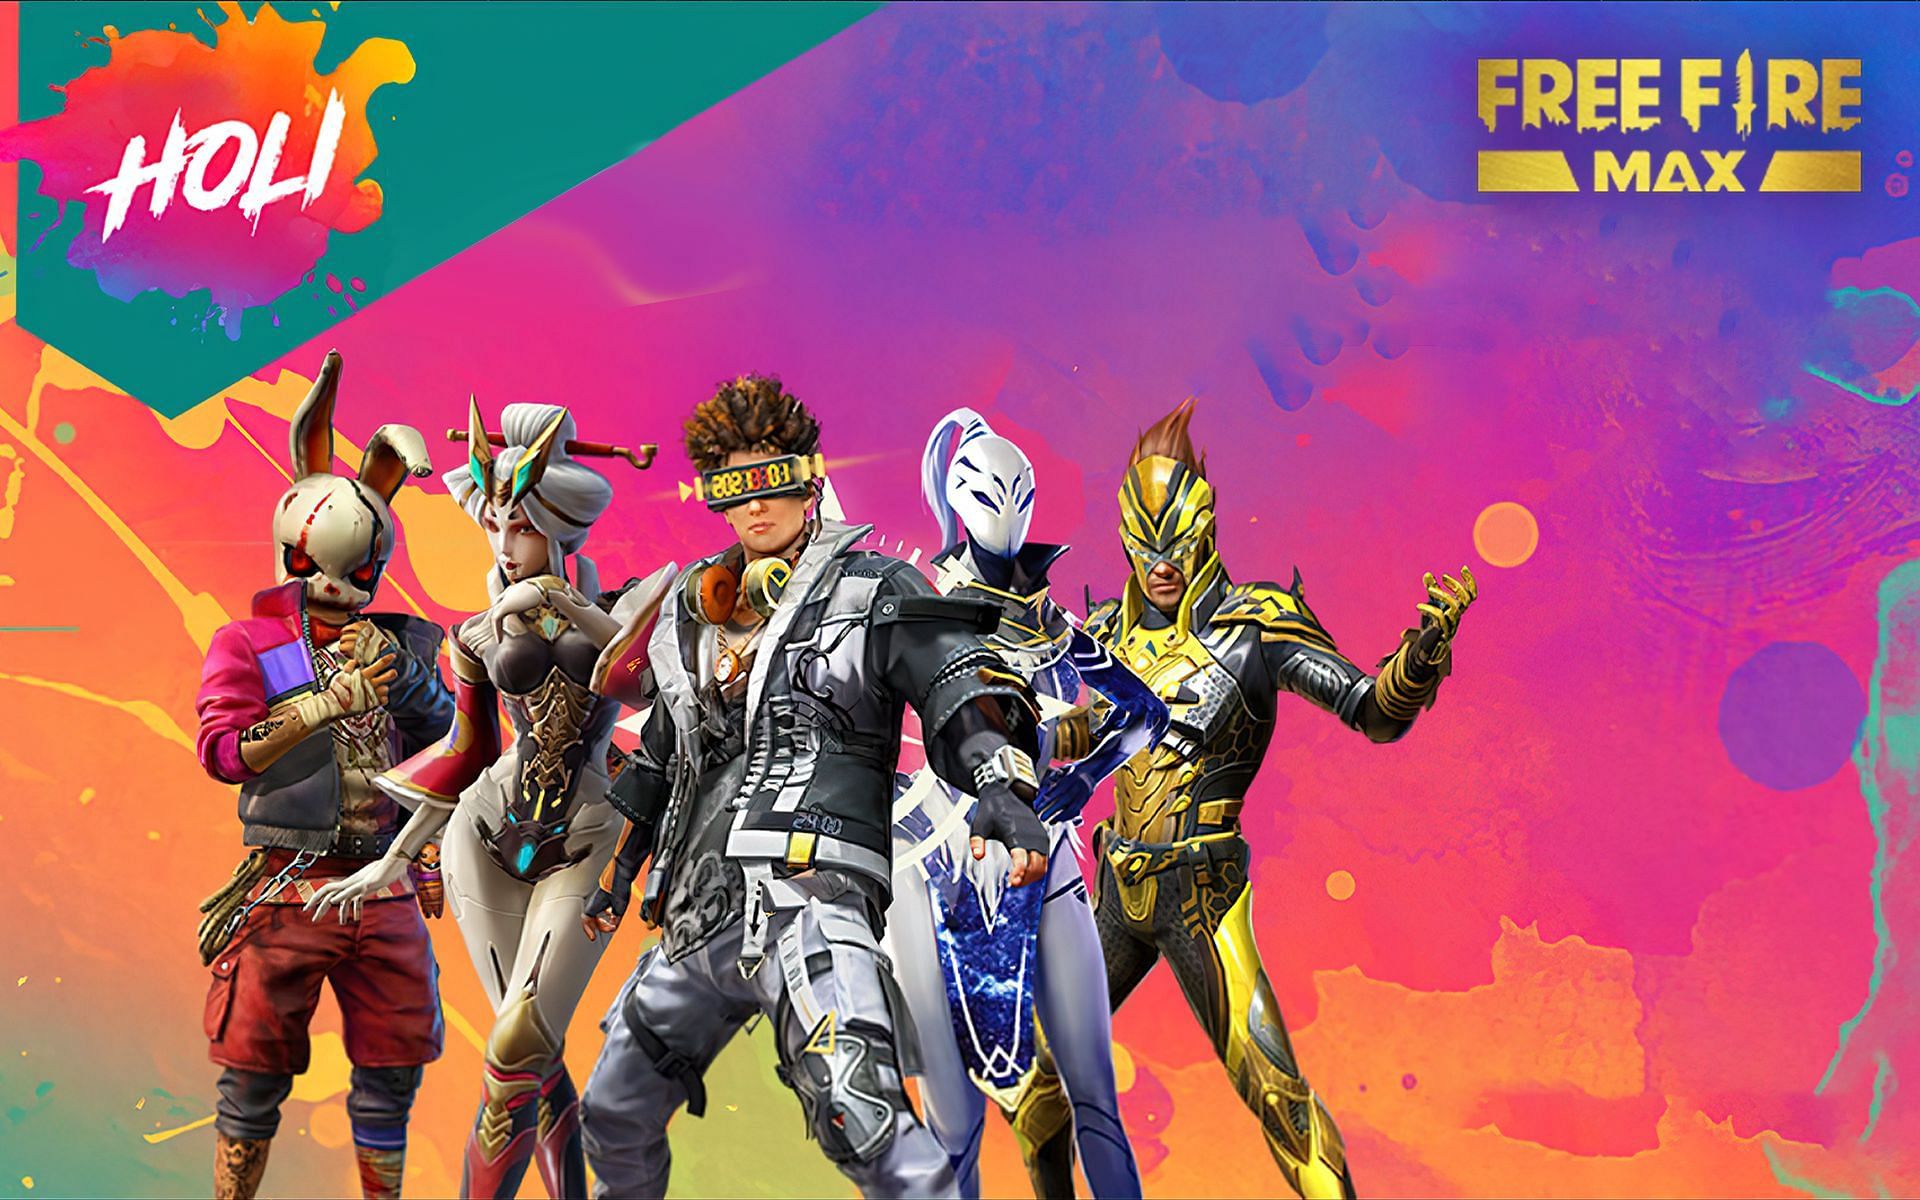 Players can claim exciting costumes in Free Fire MAX (Image via Sportskeeda)